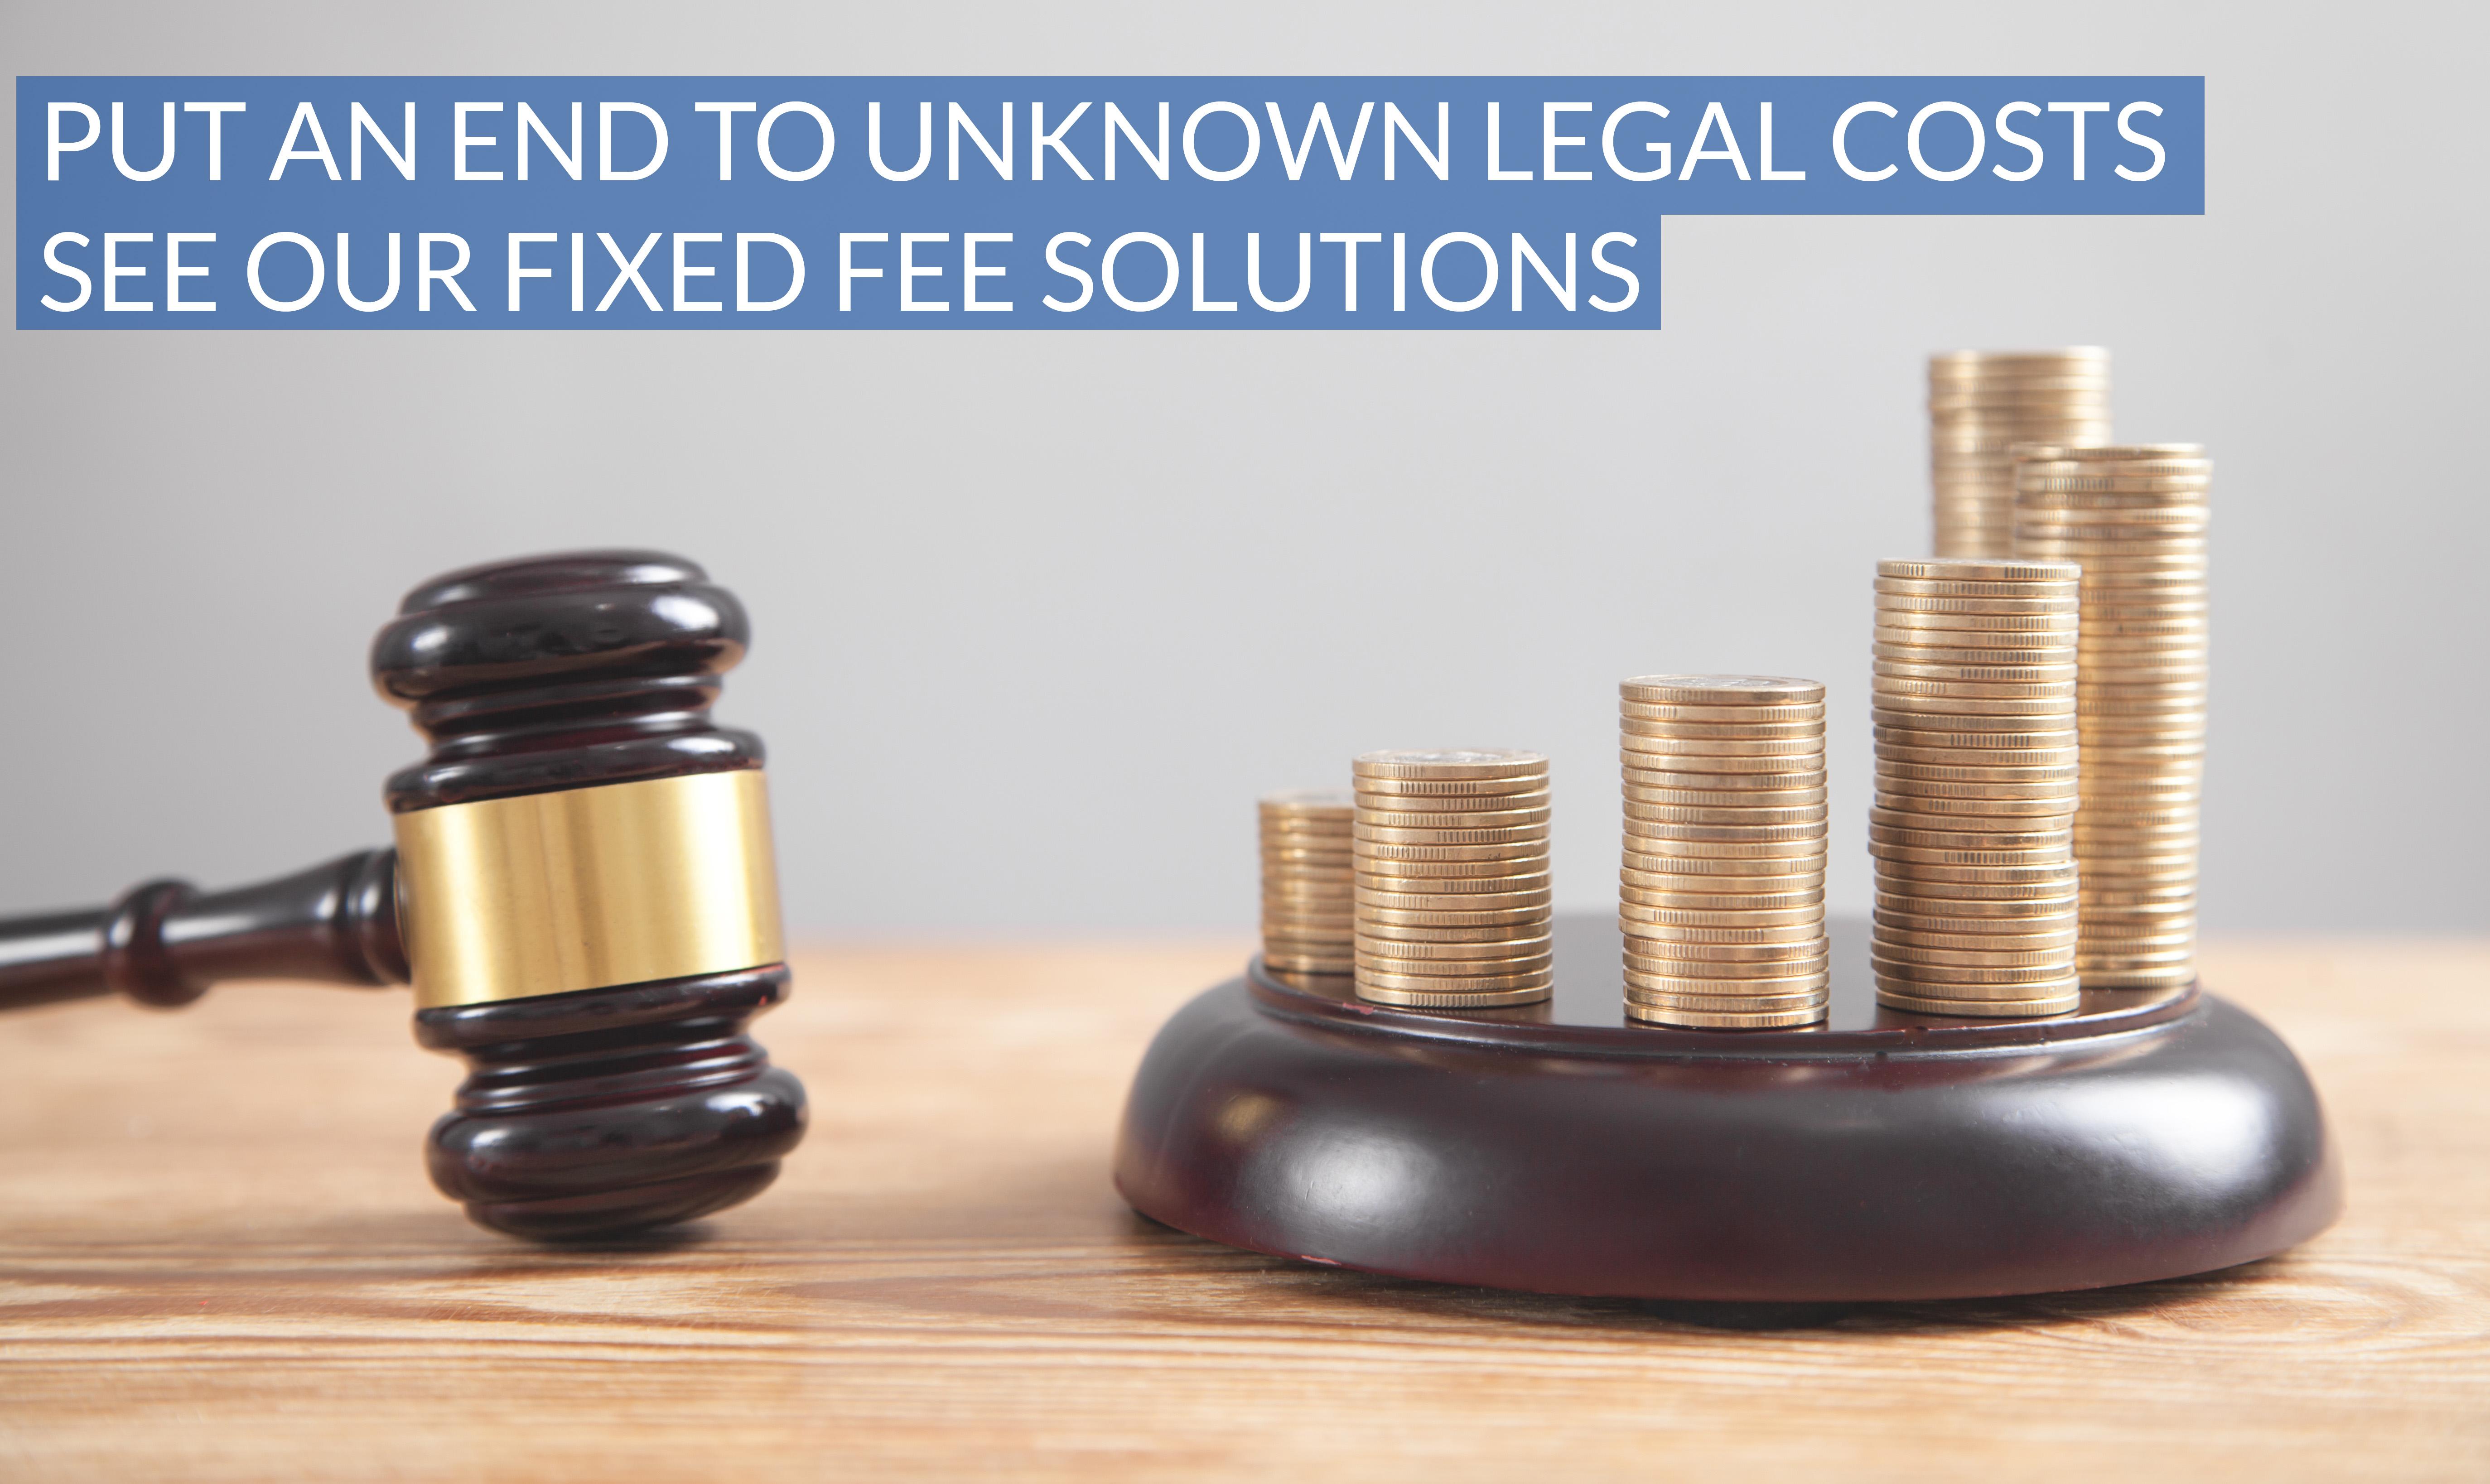 Fixed Fee Legal Solutions